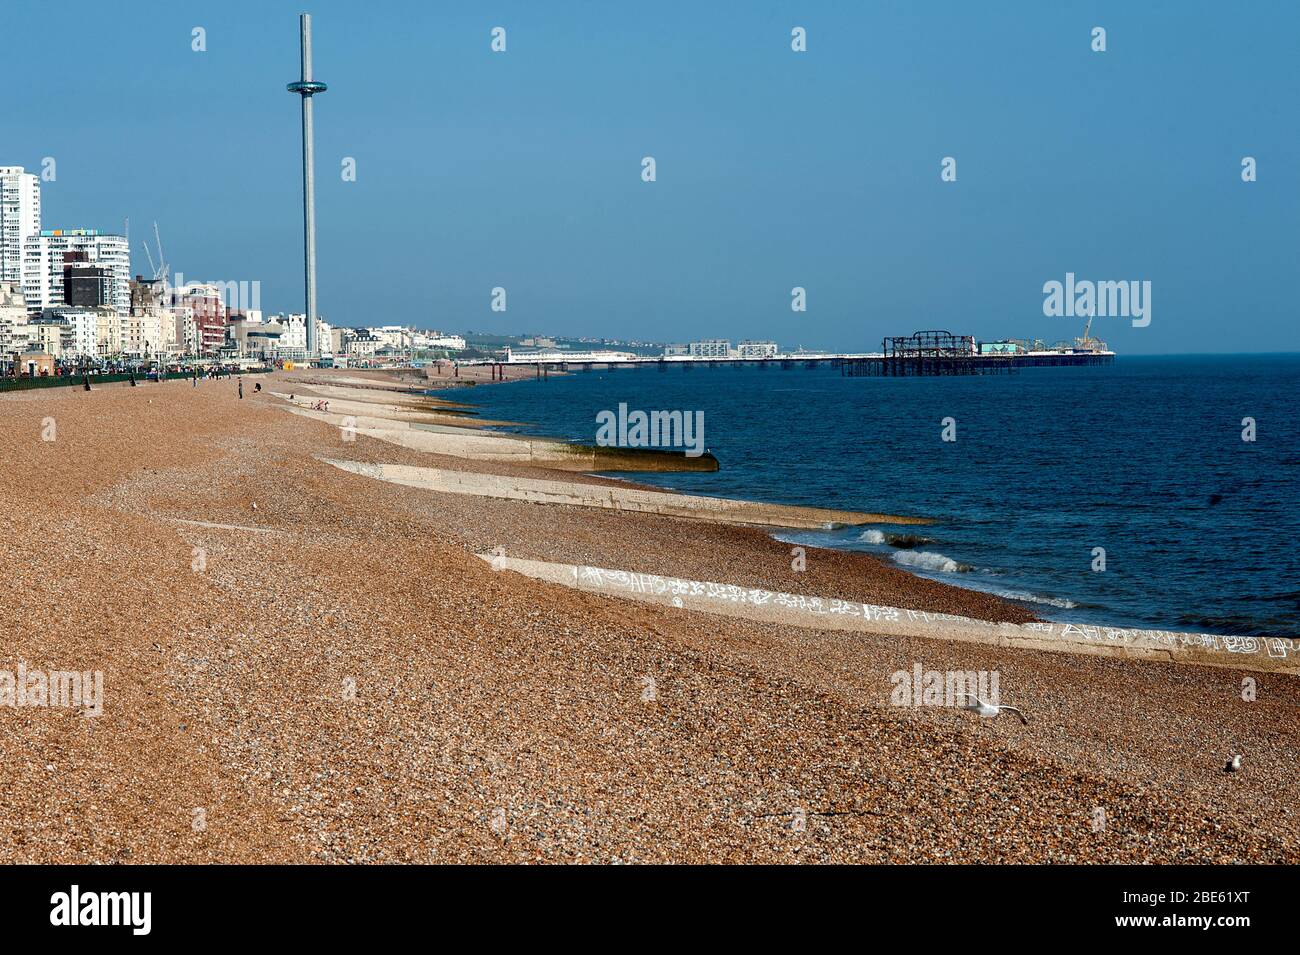 Brighton's popular beach is almost empty despite the sunny weather because of the British govt lockdown rules the wake of the coronavirus pandemic. Stock Photo